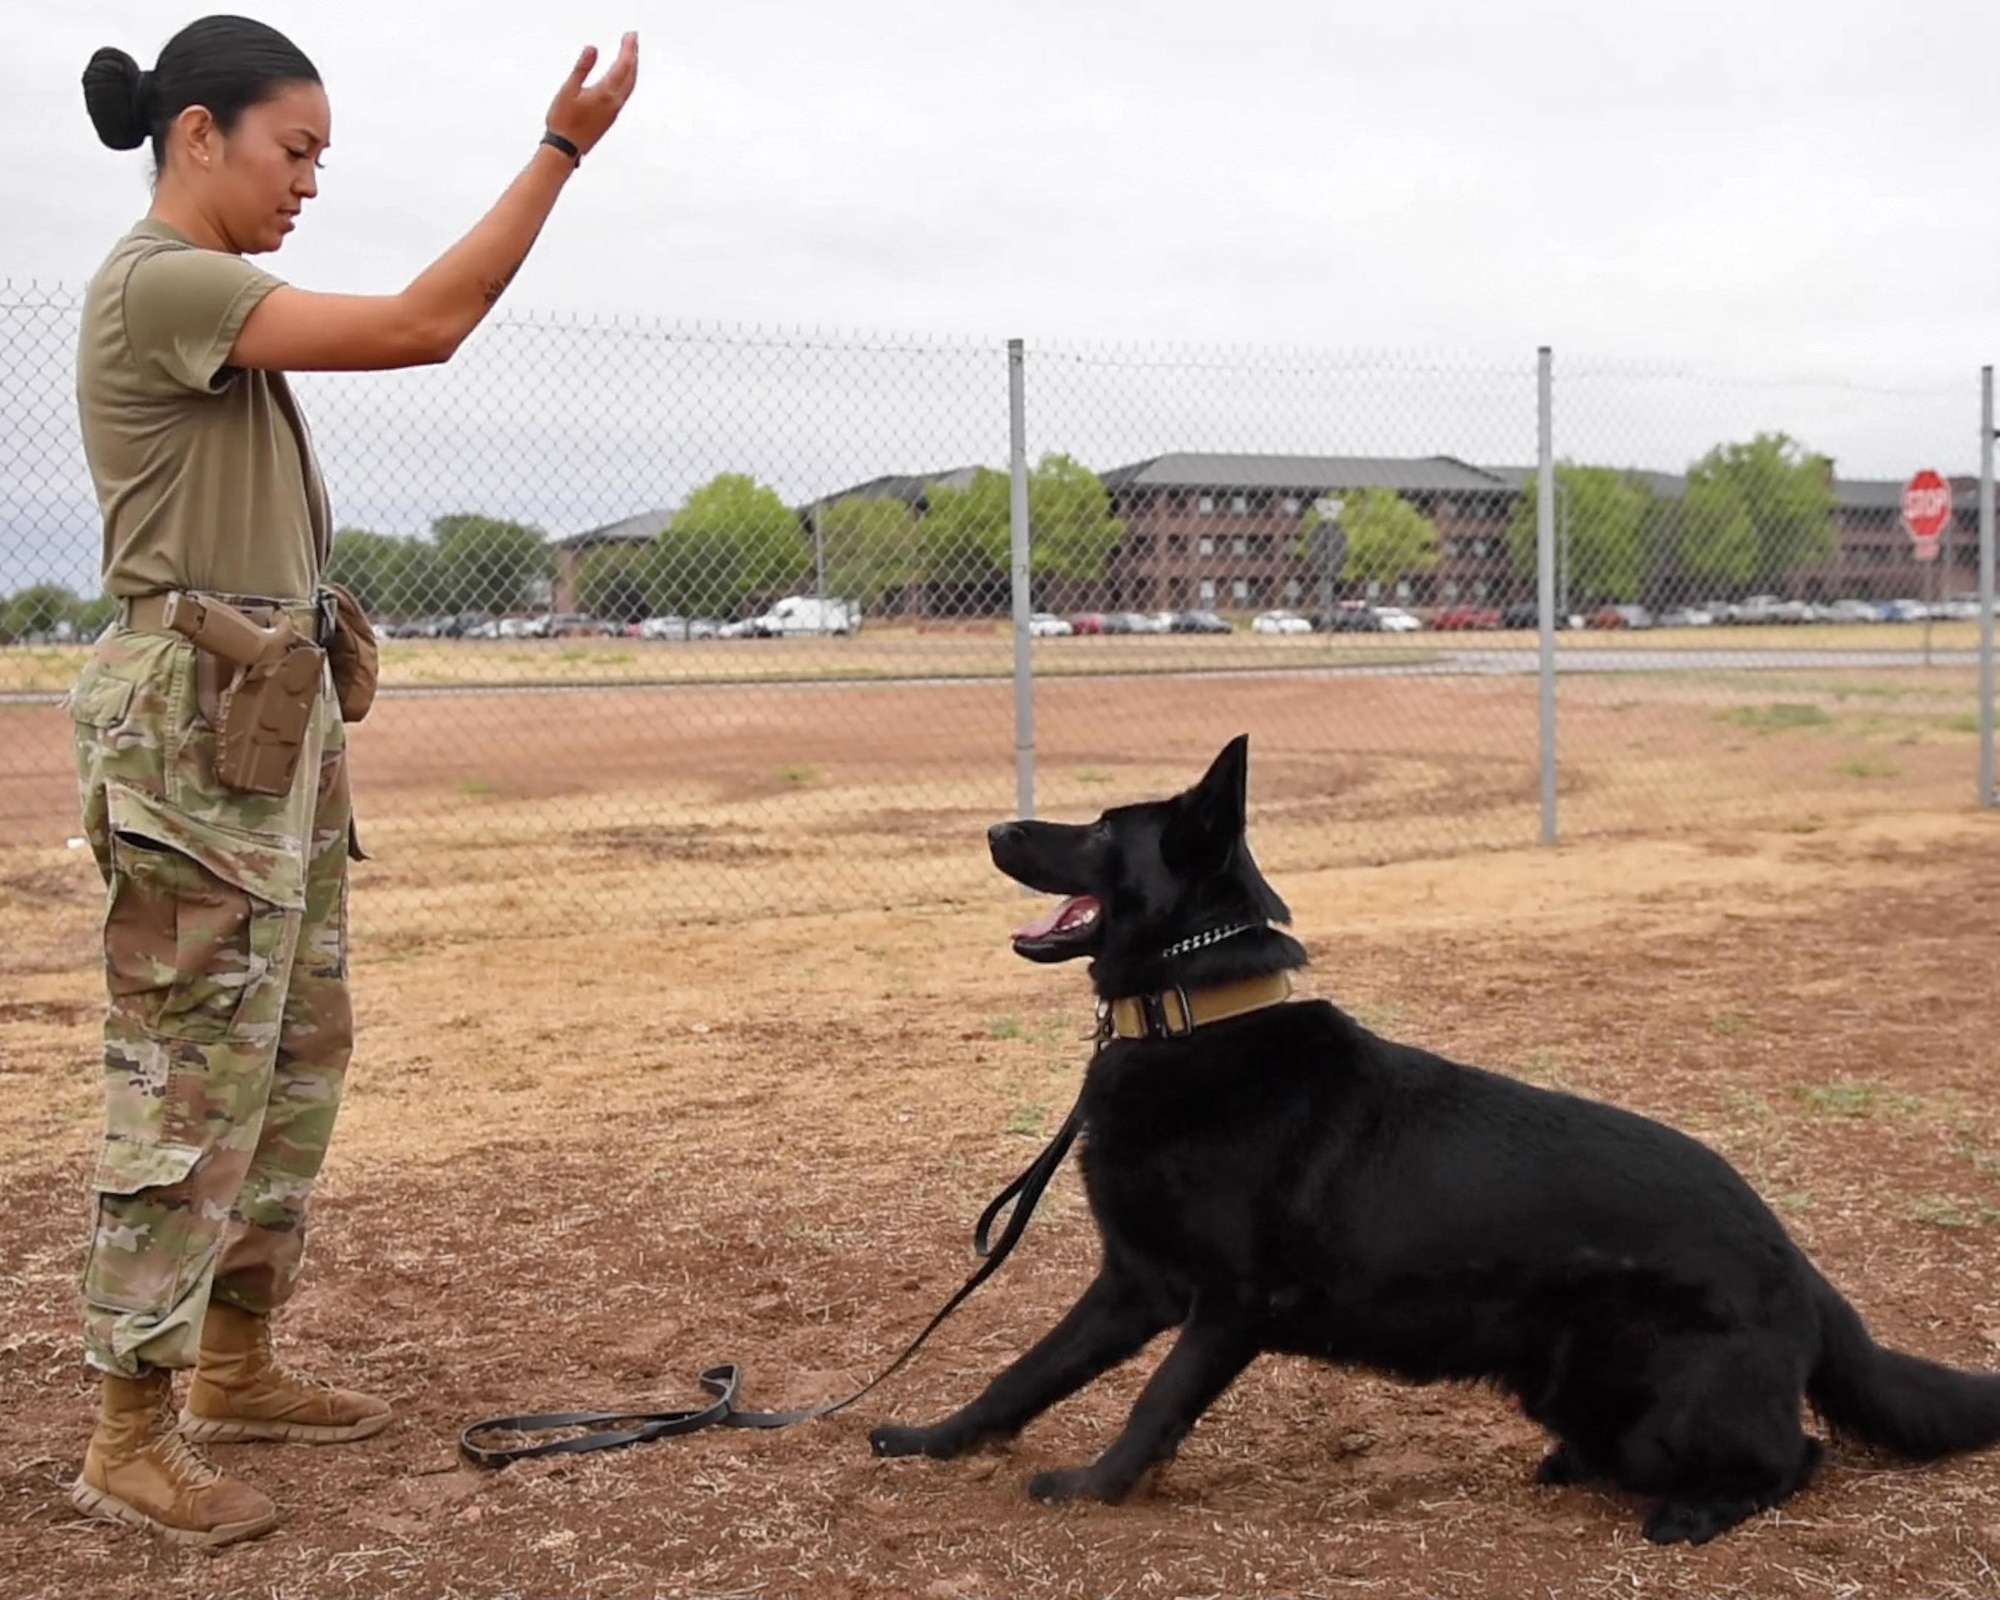 U.S. Air Force Senior Airman Georgina Silva, 17th Security Forces Squadron military working dog handler, trains MWD Aghi, 17th Security Forces detection dog, at Goodfellow Air Force Base, Texas, April 22, 2022. Silva and Aghi trained during every shift to reinforce the bond between the handler and their dog. (U.S. Air Force photo by Airman 1st Class Sarah Williams)